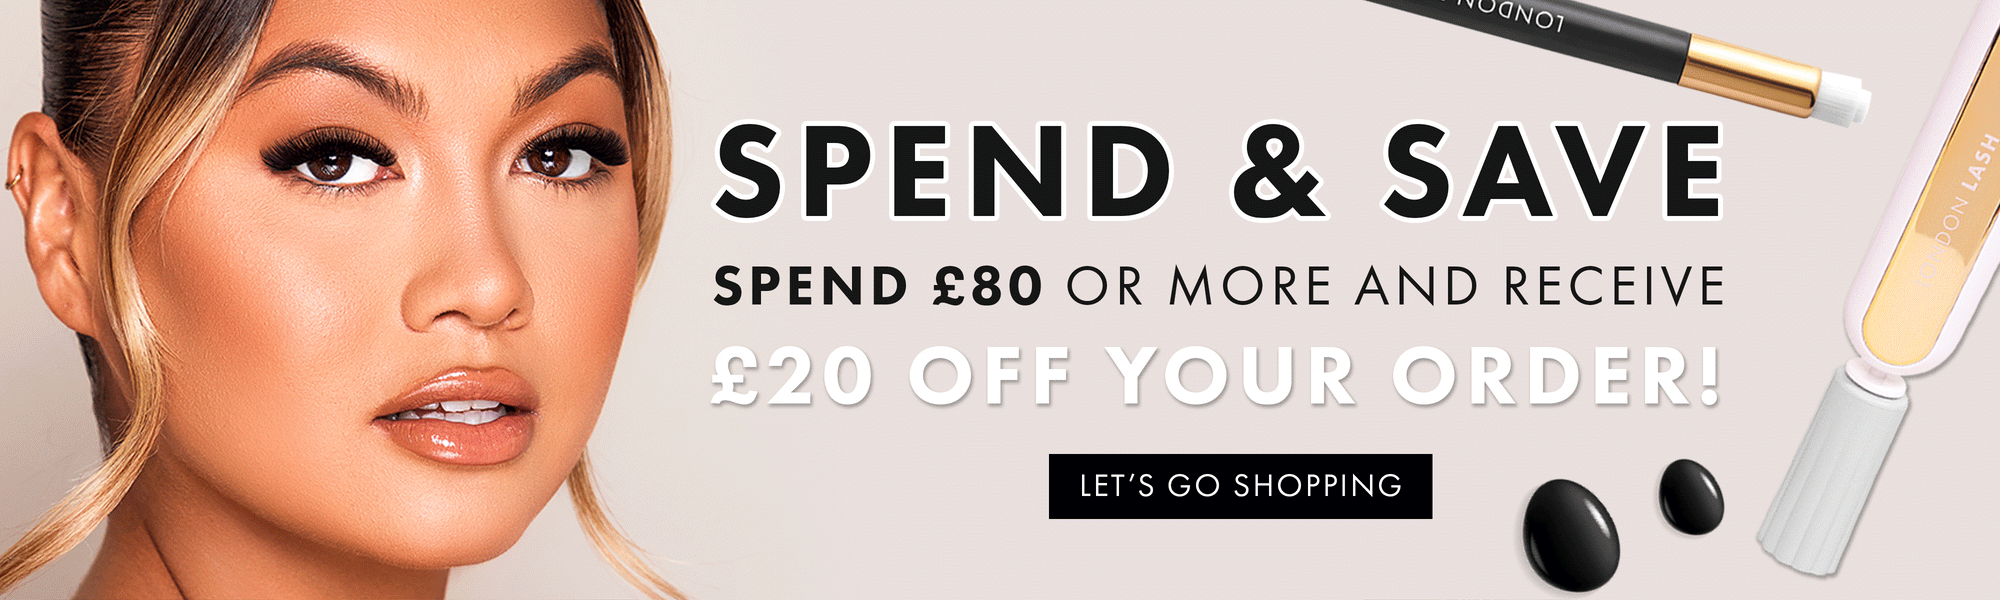 Spend £80 and save £20